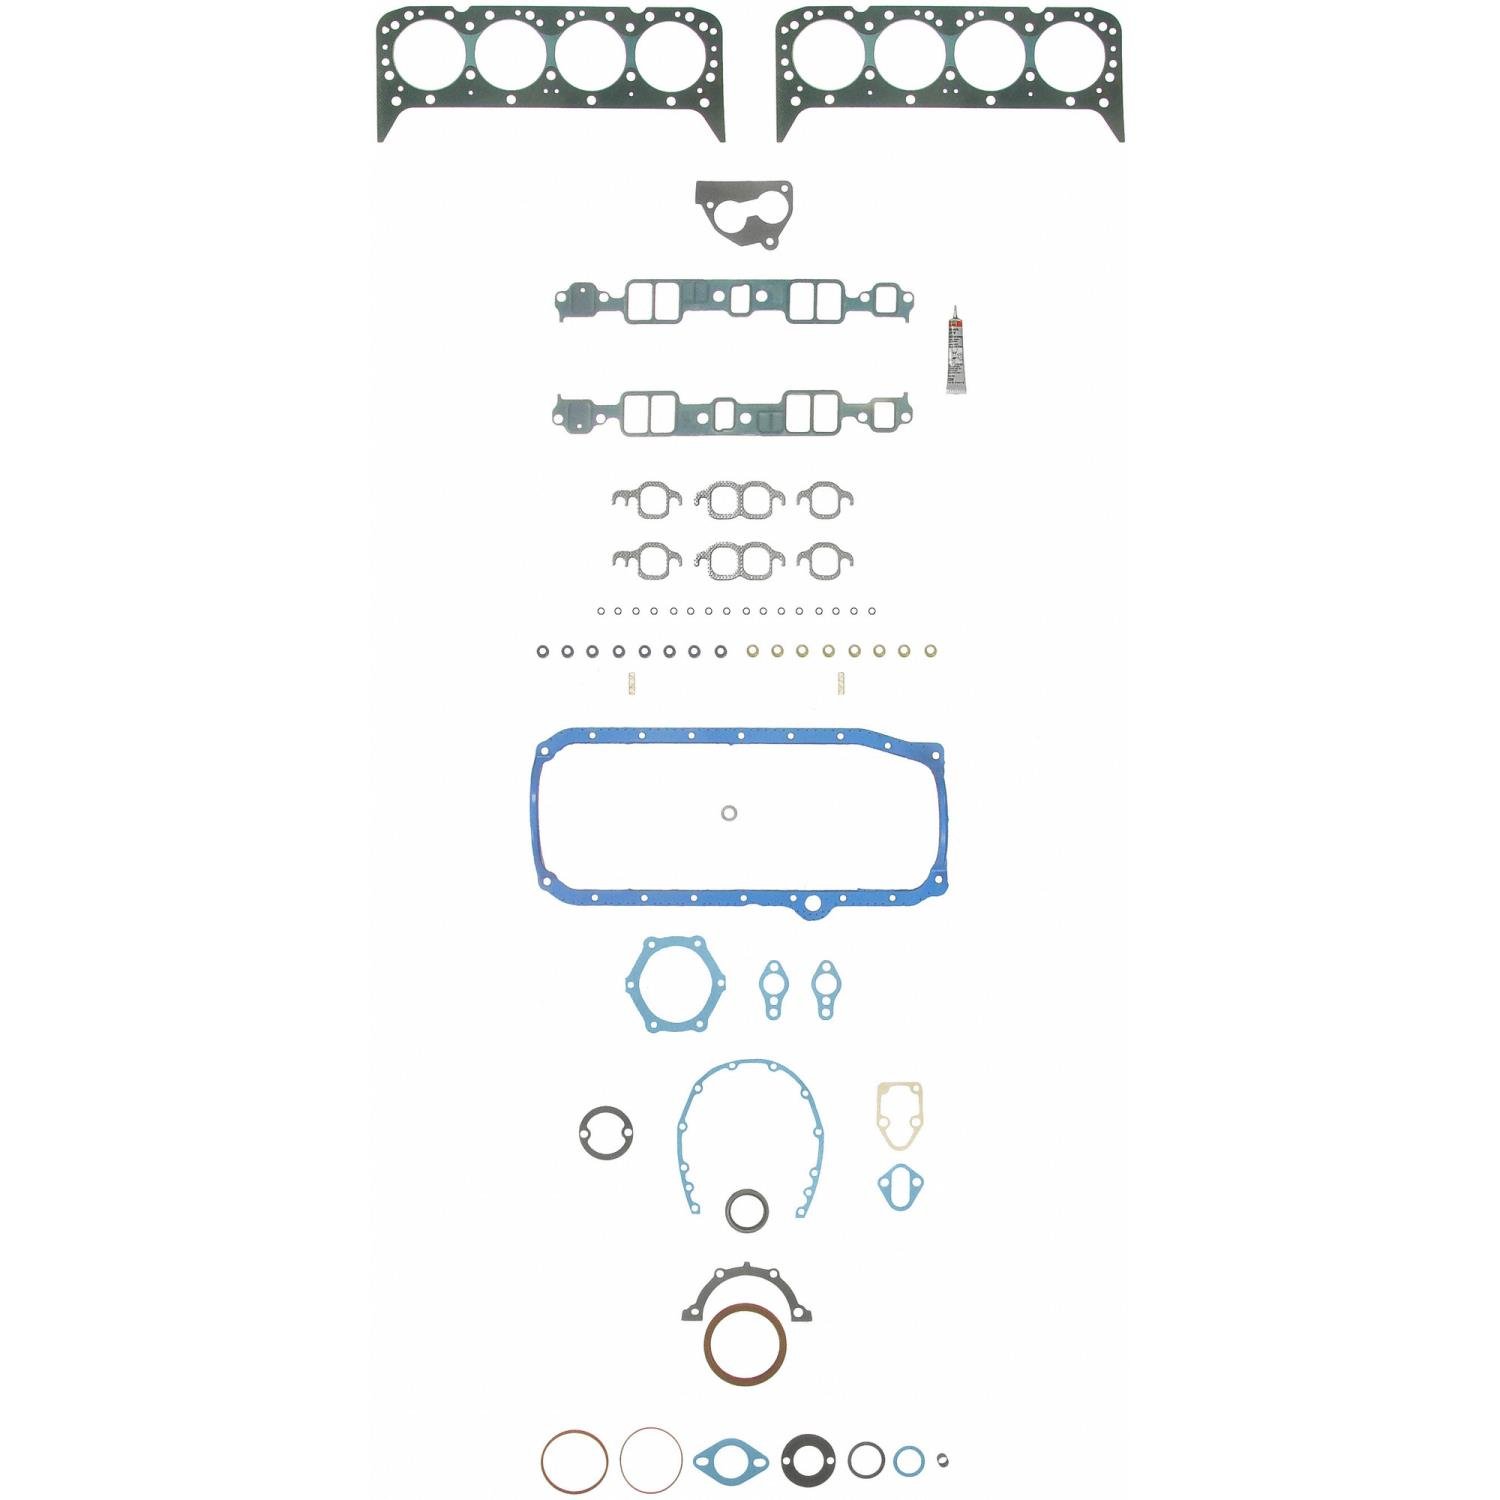 260-1121 Full Gasket Set for 1987-1995 Chevy Small Block 305 ci. Engine